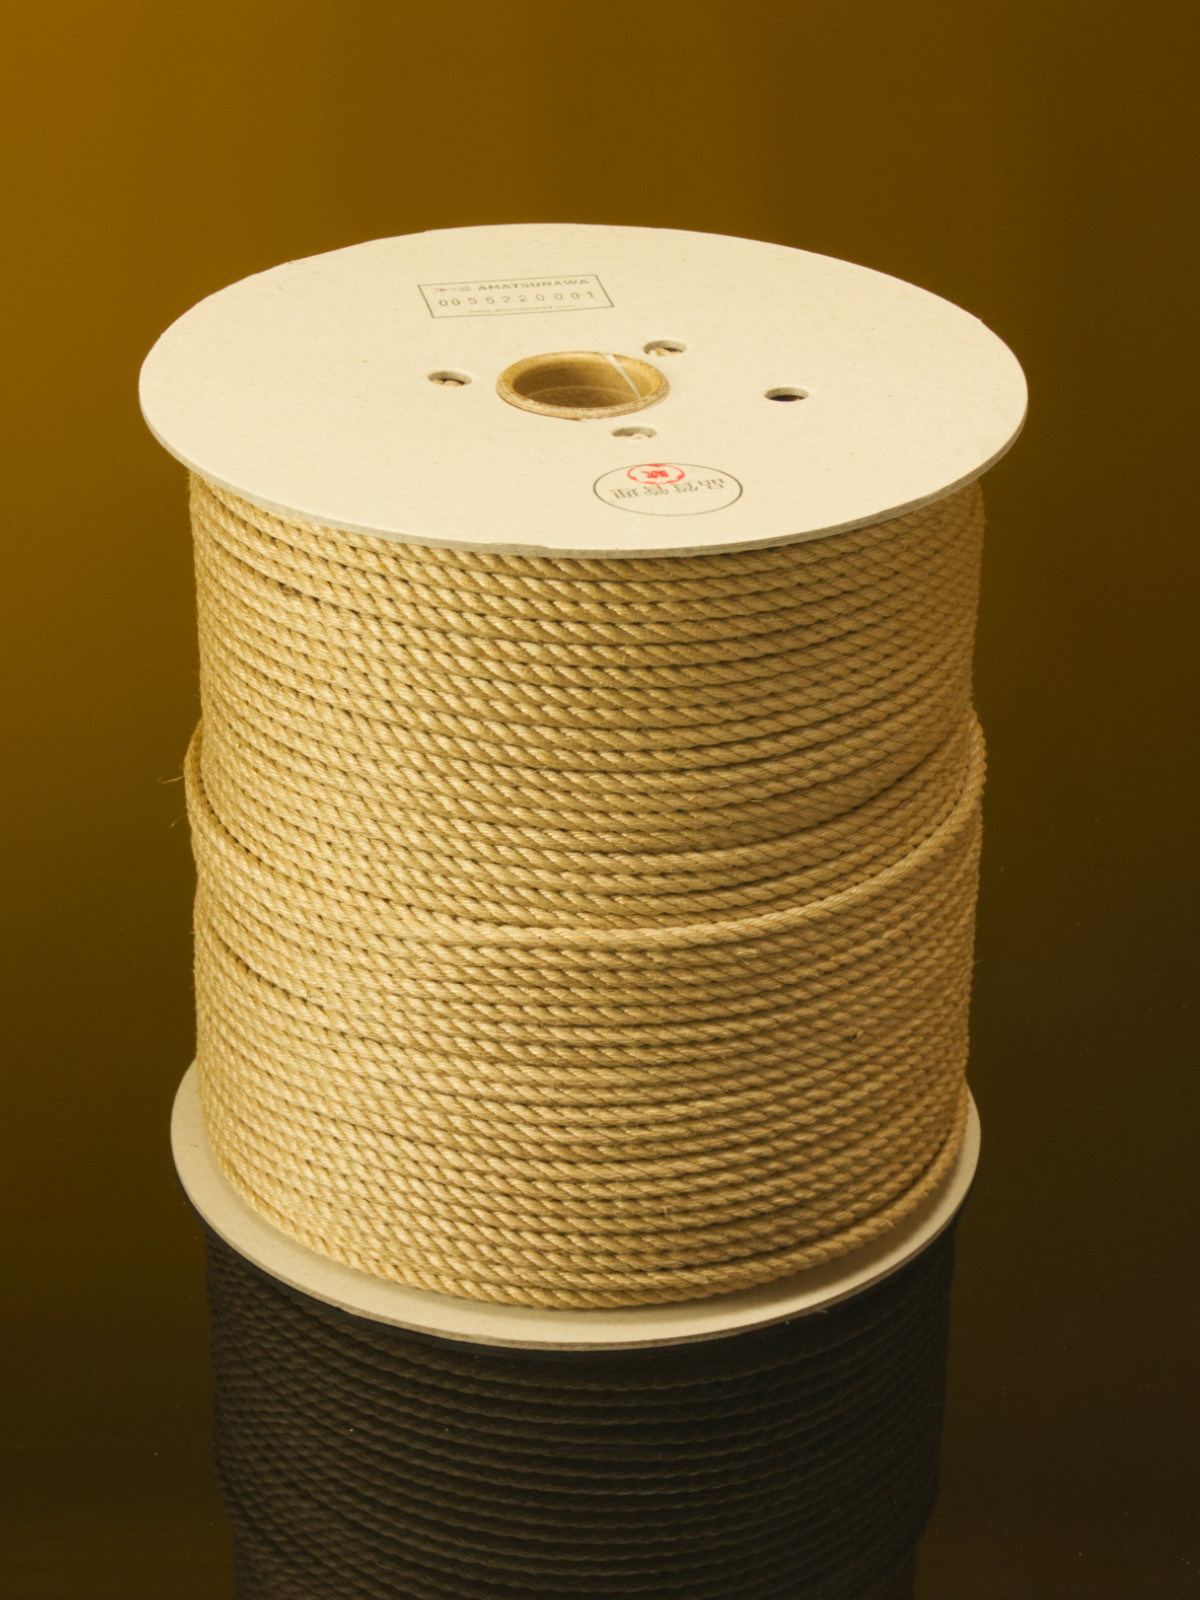 ∅ 5.5mm JOUYOKU MAXI-ROLL, ~6kg, 330m, ready-for-use Japanese-made jute rope, JBO-free